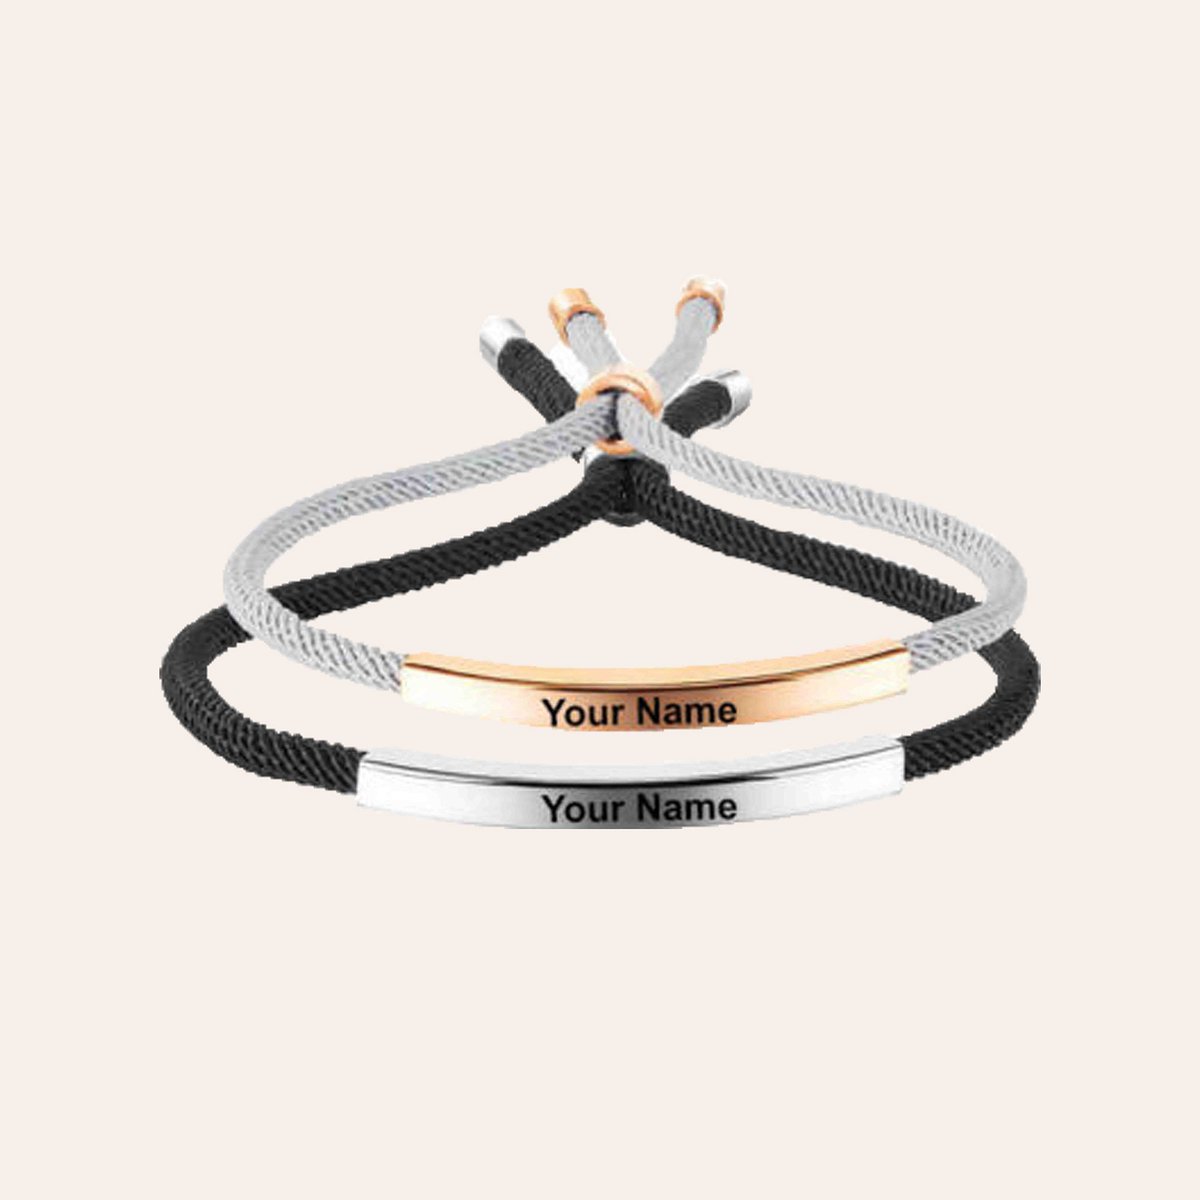 Excited to share the latest addition to my #etsy shop: Personalized Engraved Adjustable Stainless Steel Braided Rope Bracelet Jewellery etsy.me/3fqSJdj #rosegold #yes #women #silver #namebracelet #silverbracelet #ropebraided #custombracelet #cuffbracelet